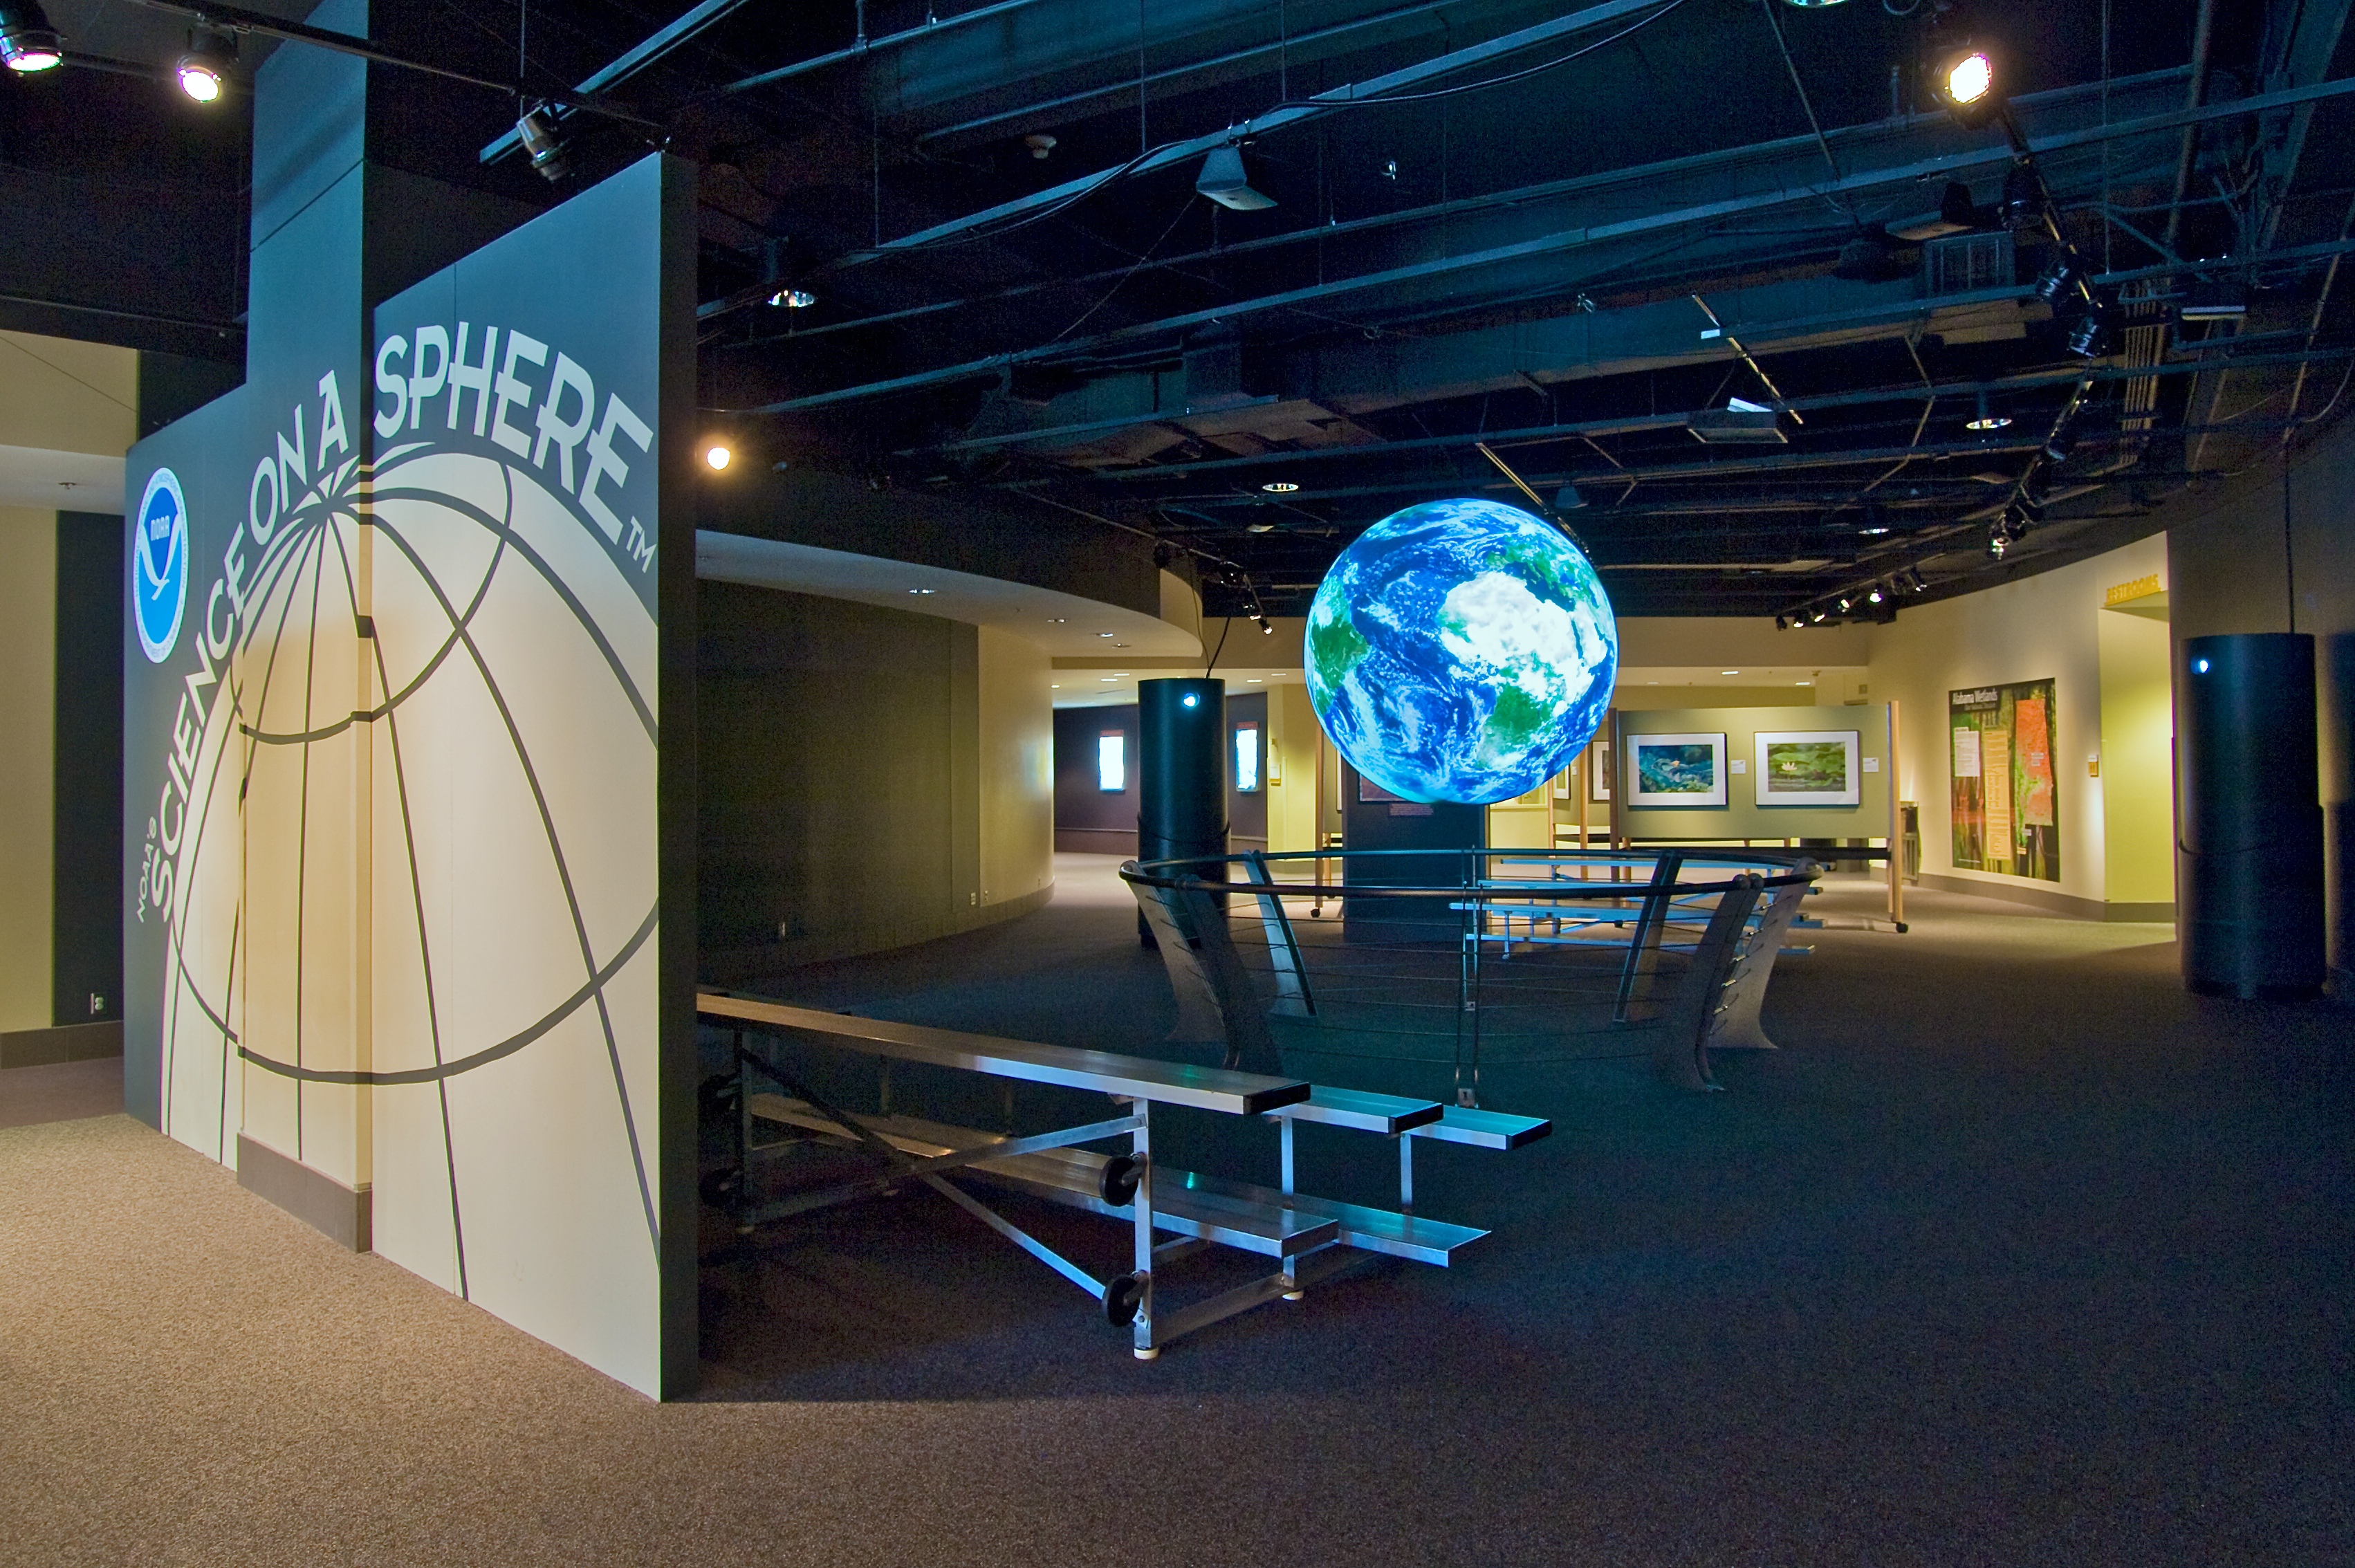 Science On a Sphere hangs in an empty exhibit hall. A partition doubles as a sign reading 'Science On a Sphere' and blocks some of the ambient light coming in from the left